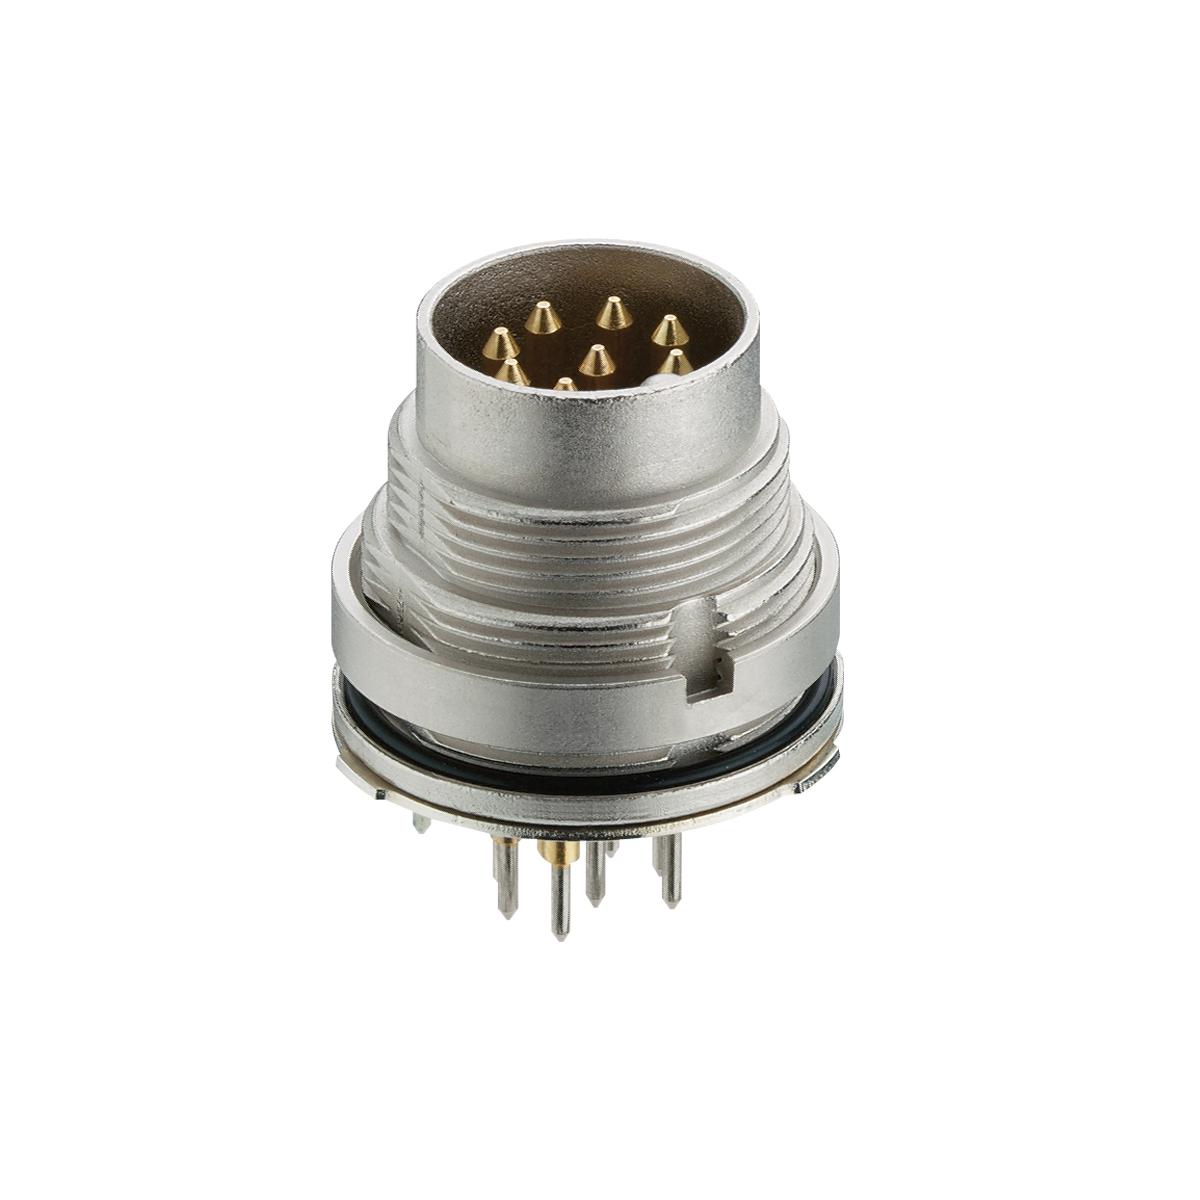 Lumberg: 031798-2 (Series 03 | Circular connectors with threaded joint M16 acc. to IEC 61076-2-106, IP40/IP68)